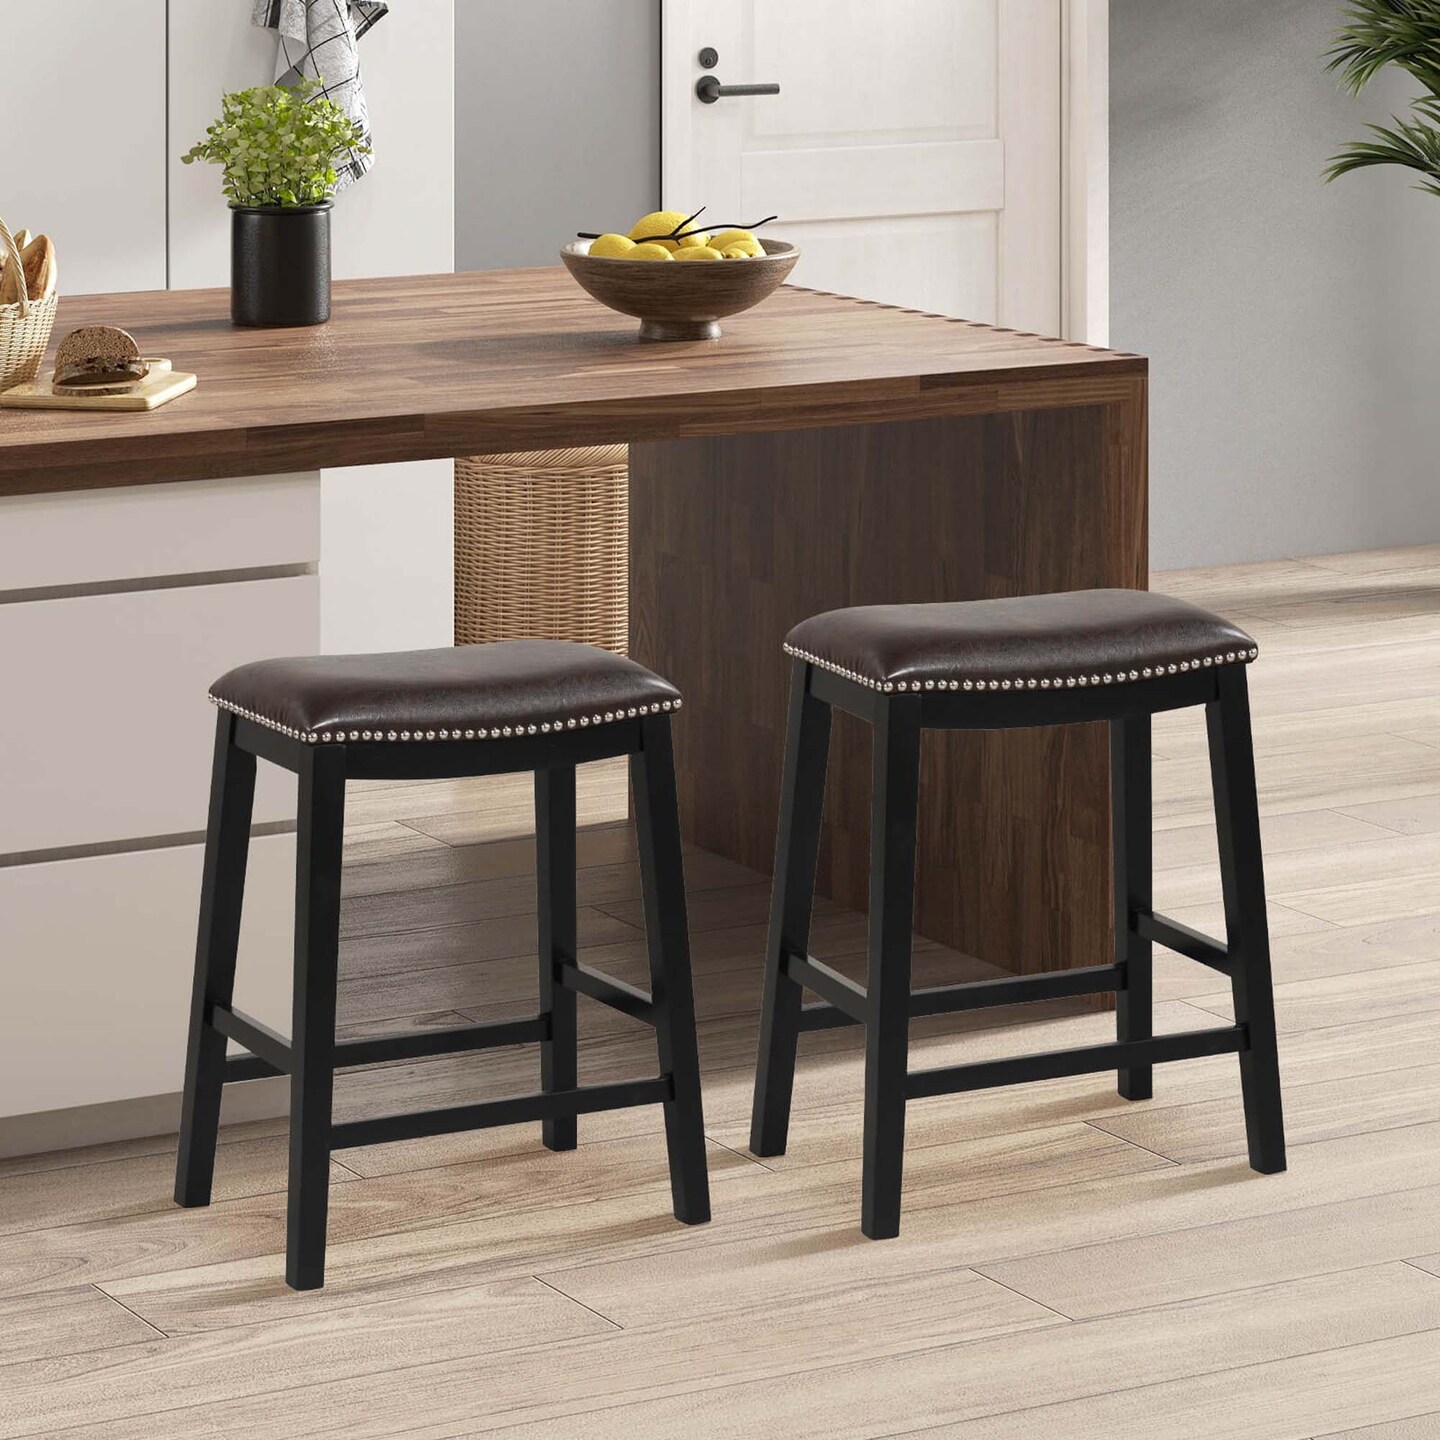 Costway 26-Inch Bar Stool Set of 2 Counter Height Saddle Stools with Upholstered Seat Brown/Black/Gray